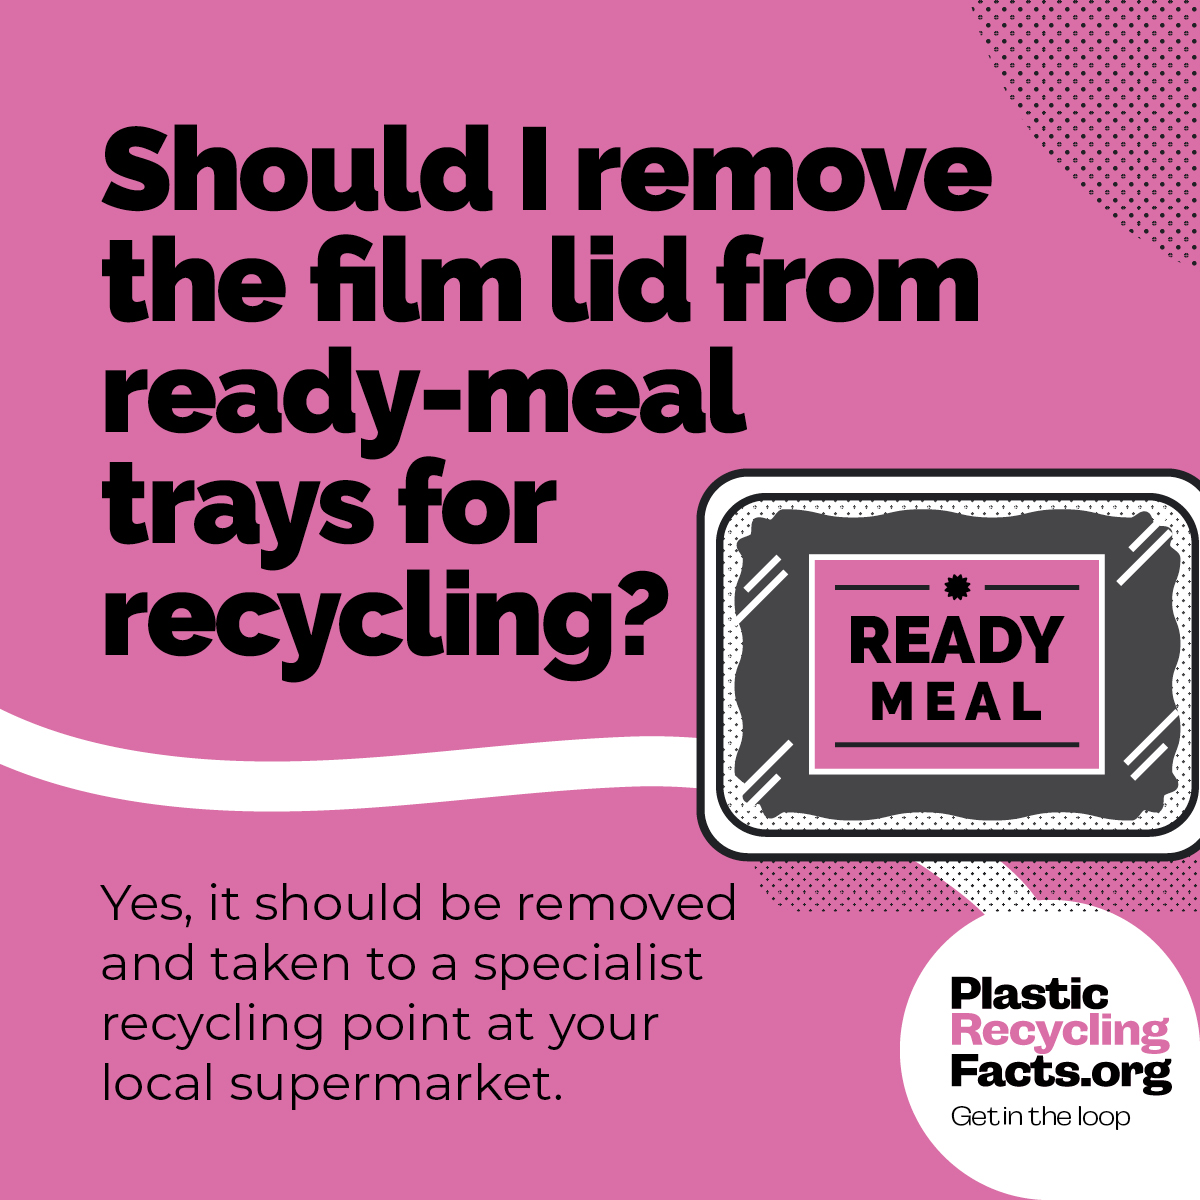 Ready to eat but not quite ready to recycle... Peel off the film lid and take it to your local supermarket for recycling. ♻️ 🛒 

#sustainability #plasticrecyclingfacts #plasticrecycling #readymeals #recycle